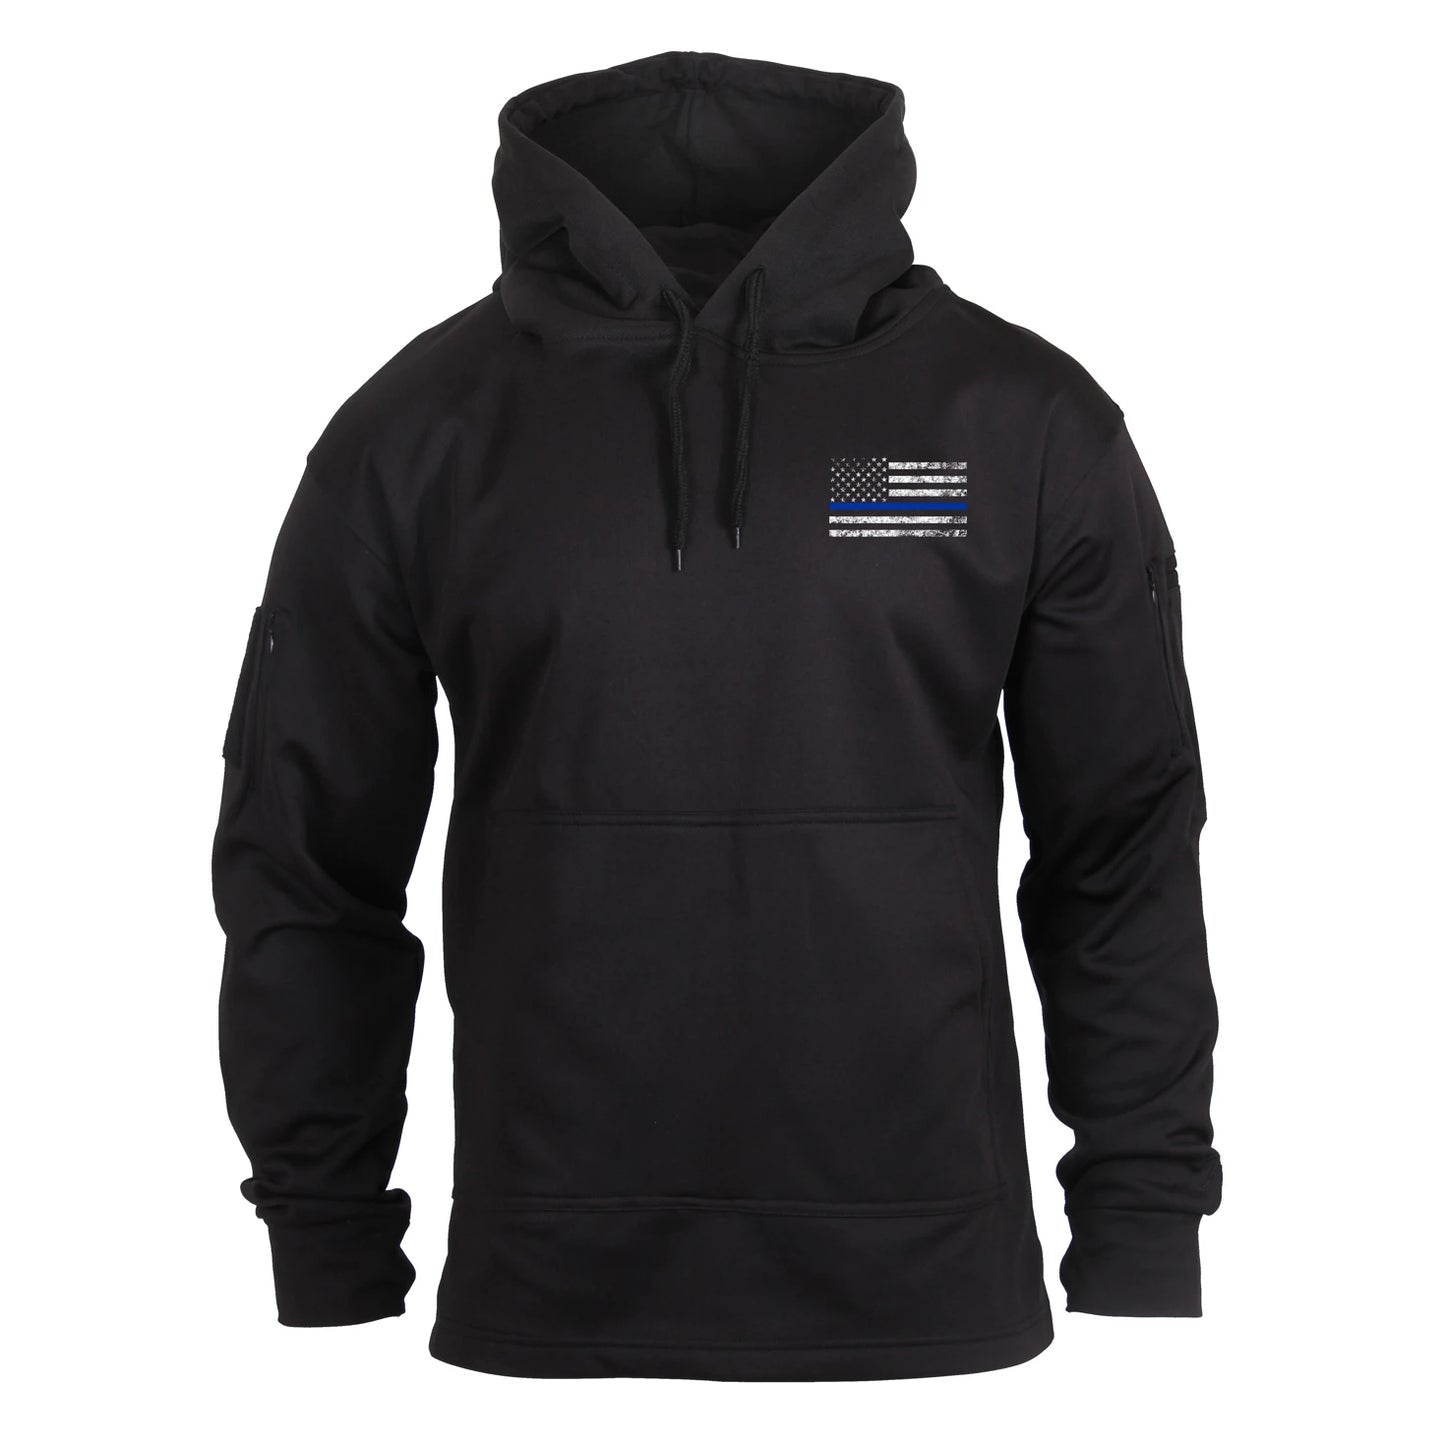 Rothco | Thin Blue Line Concealed Carry Hoodie Sweatshirt